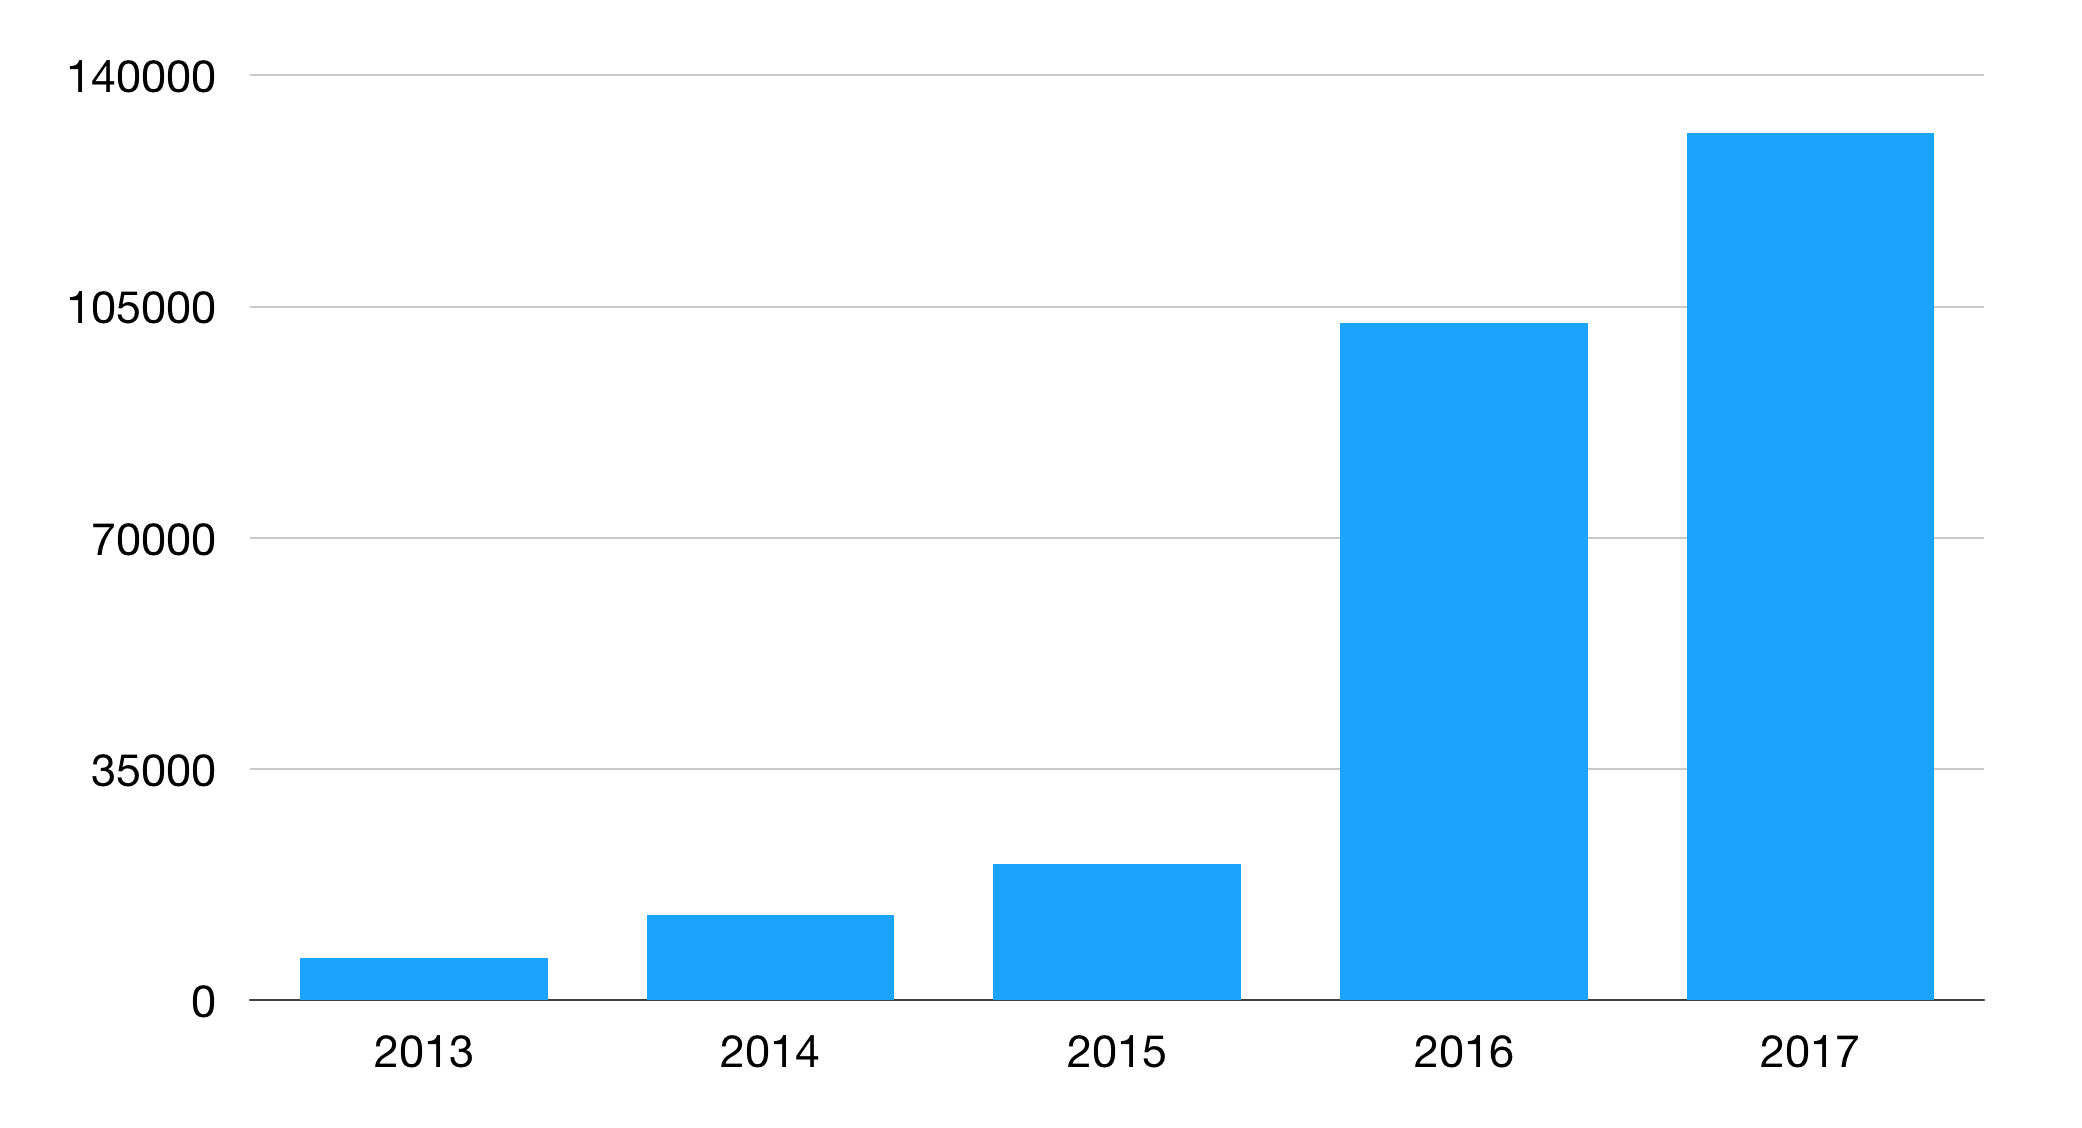 A chart showing the growth in articles read year over year.